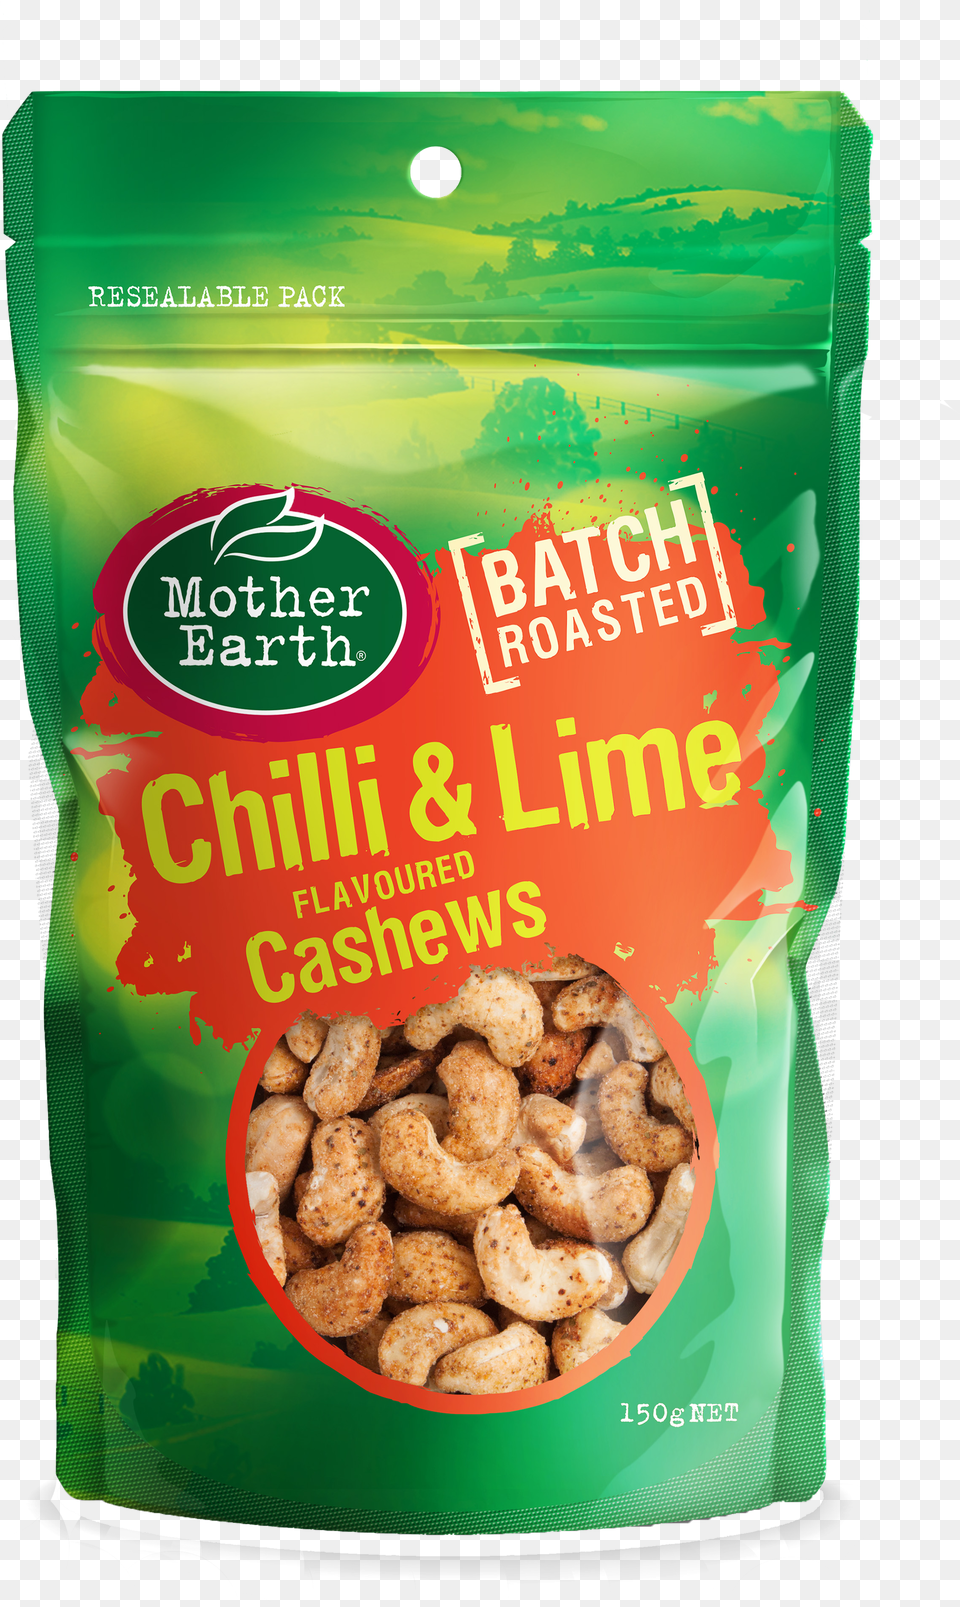 Mother Earth Chilli And Lime Cashews Png Image